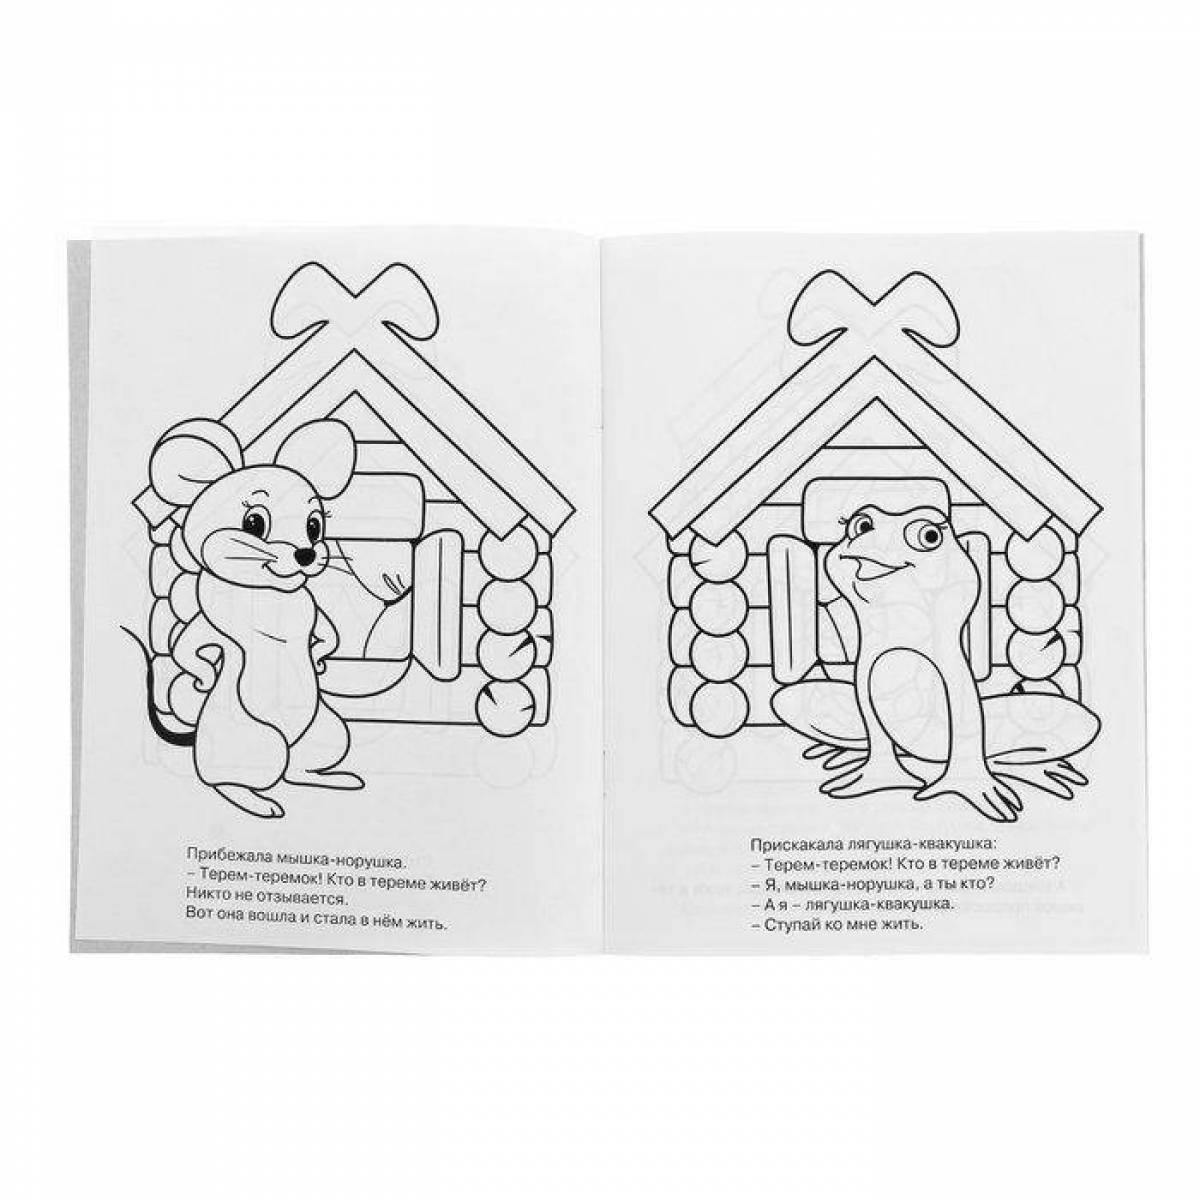 Entertaining coloring house for kids